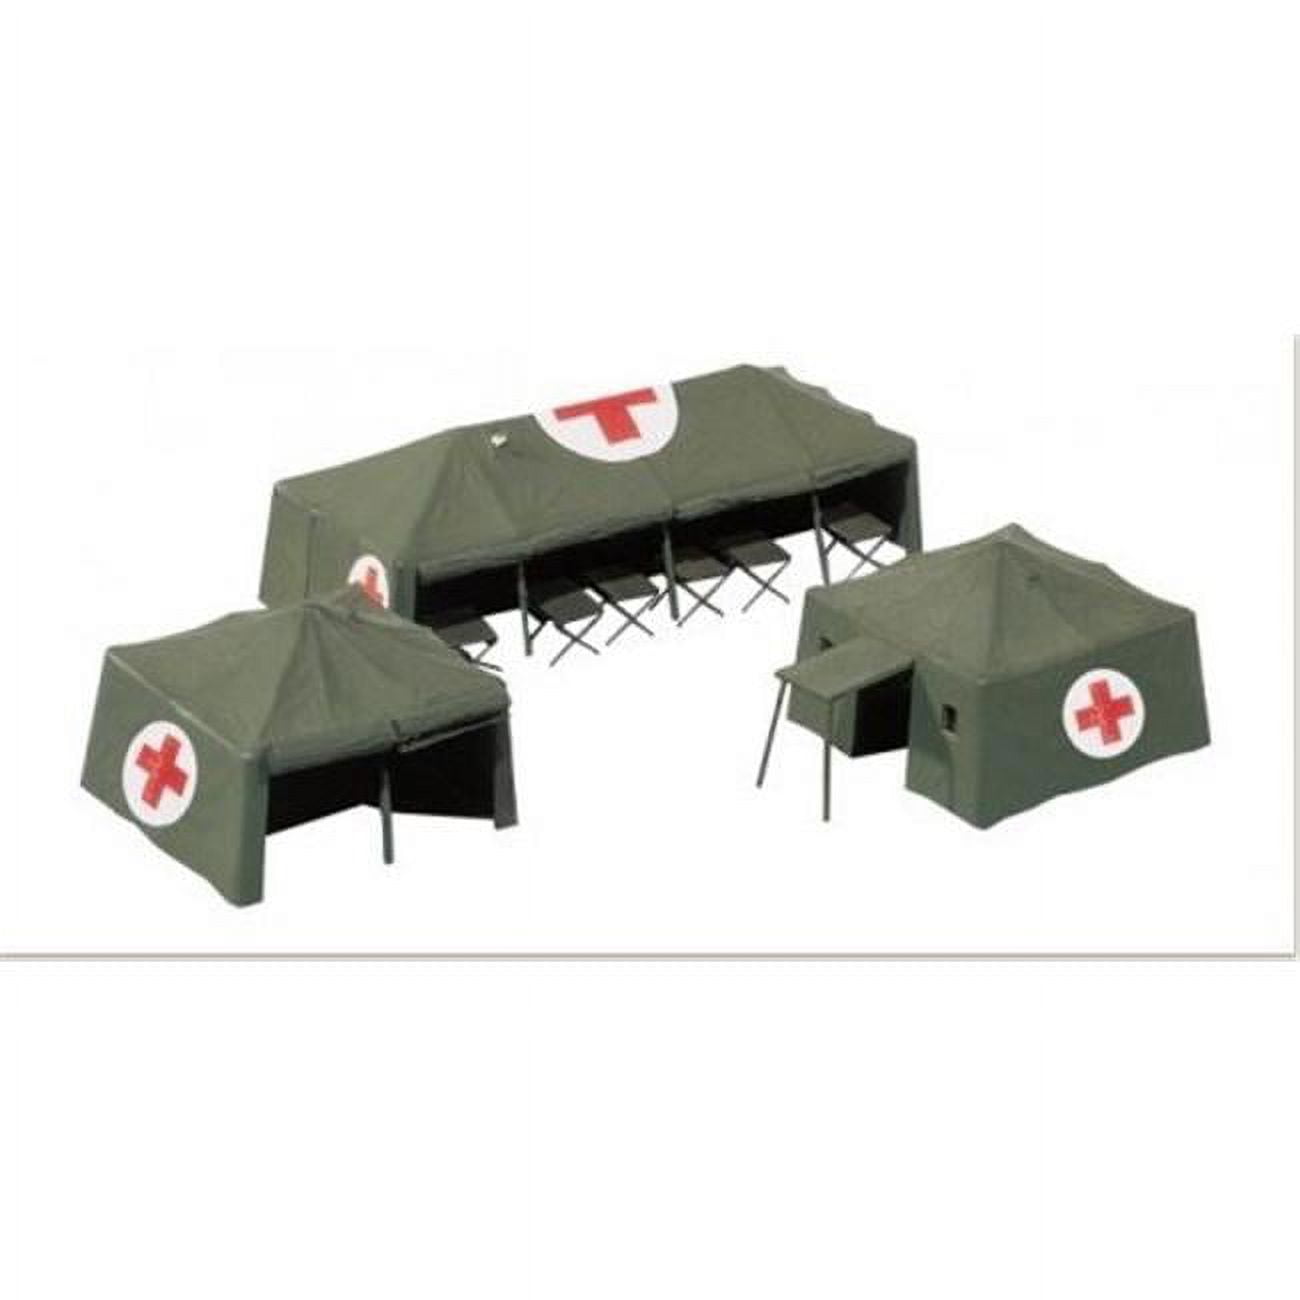 1 Isto 87 Mliitary Medical Service Tents Model Planes